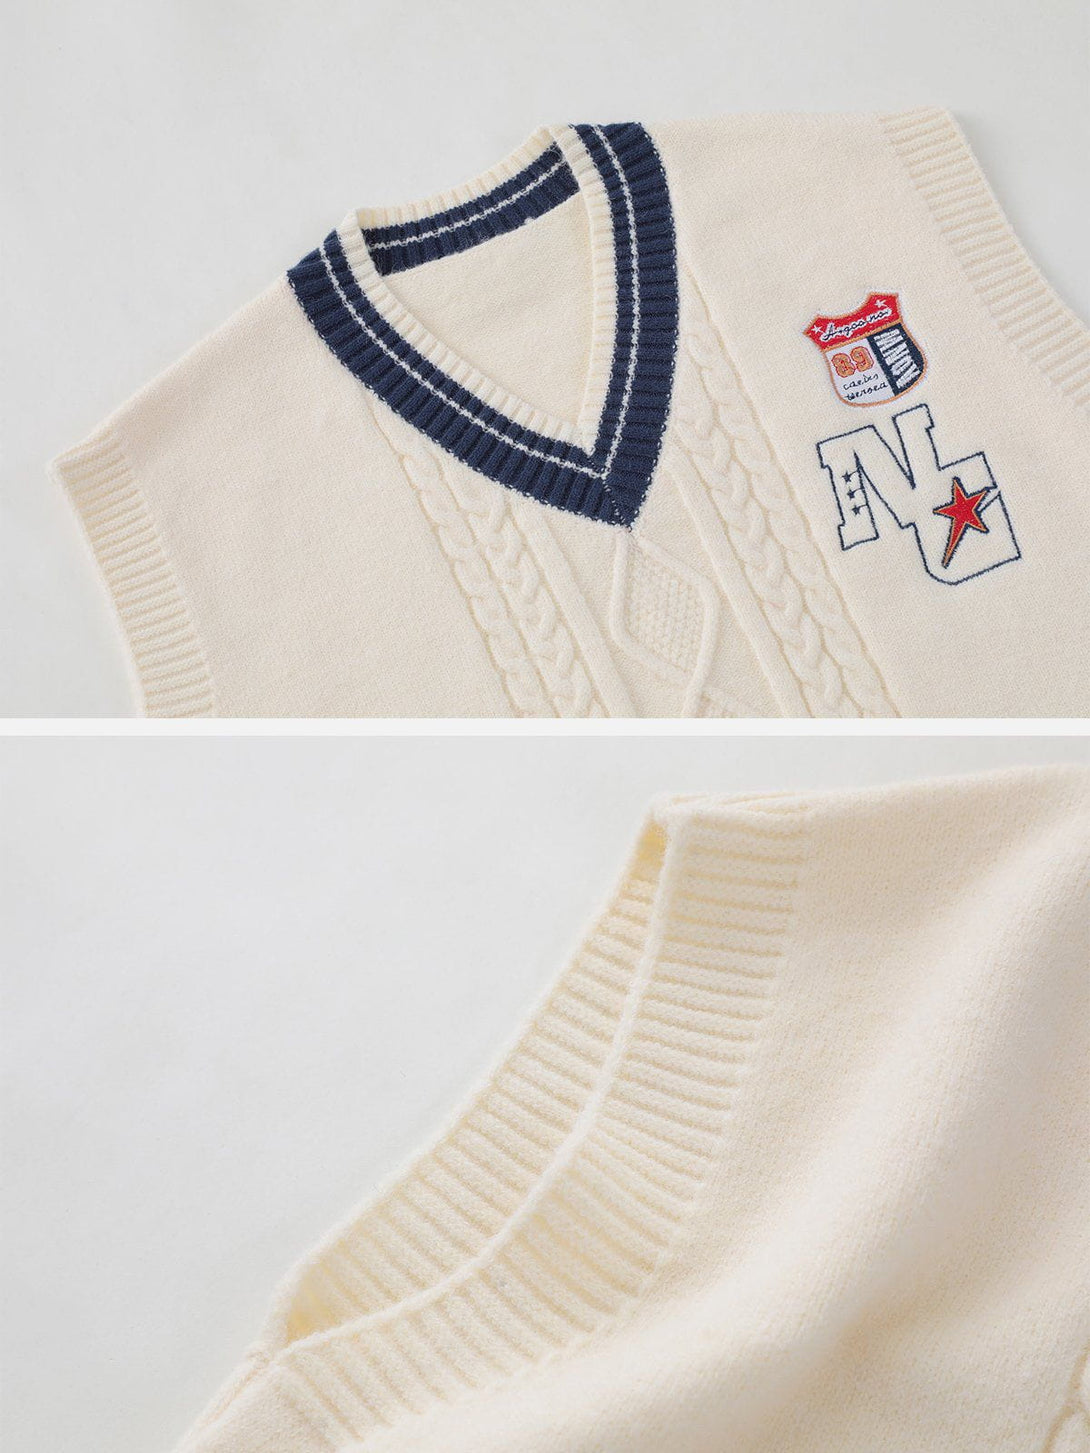 Levefly - Lettered Star Embroidery Sweater Vest - Streetwear Fashion - levefly.com